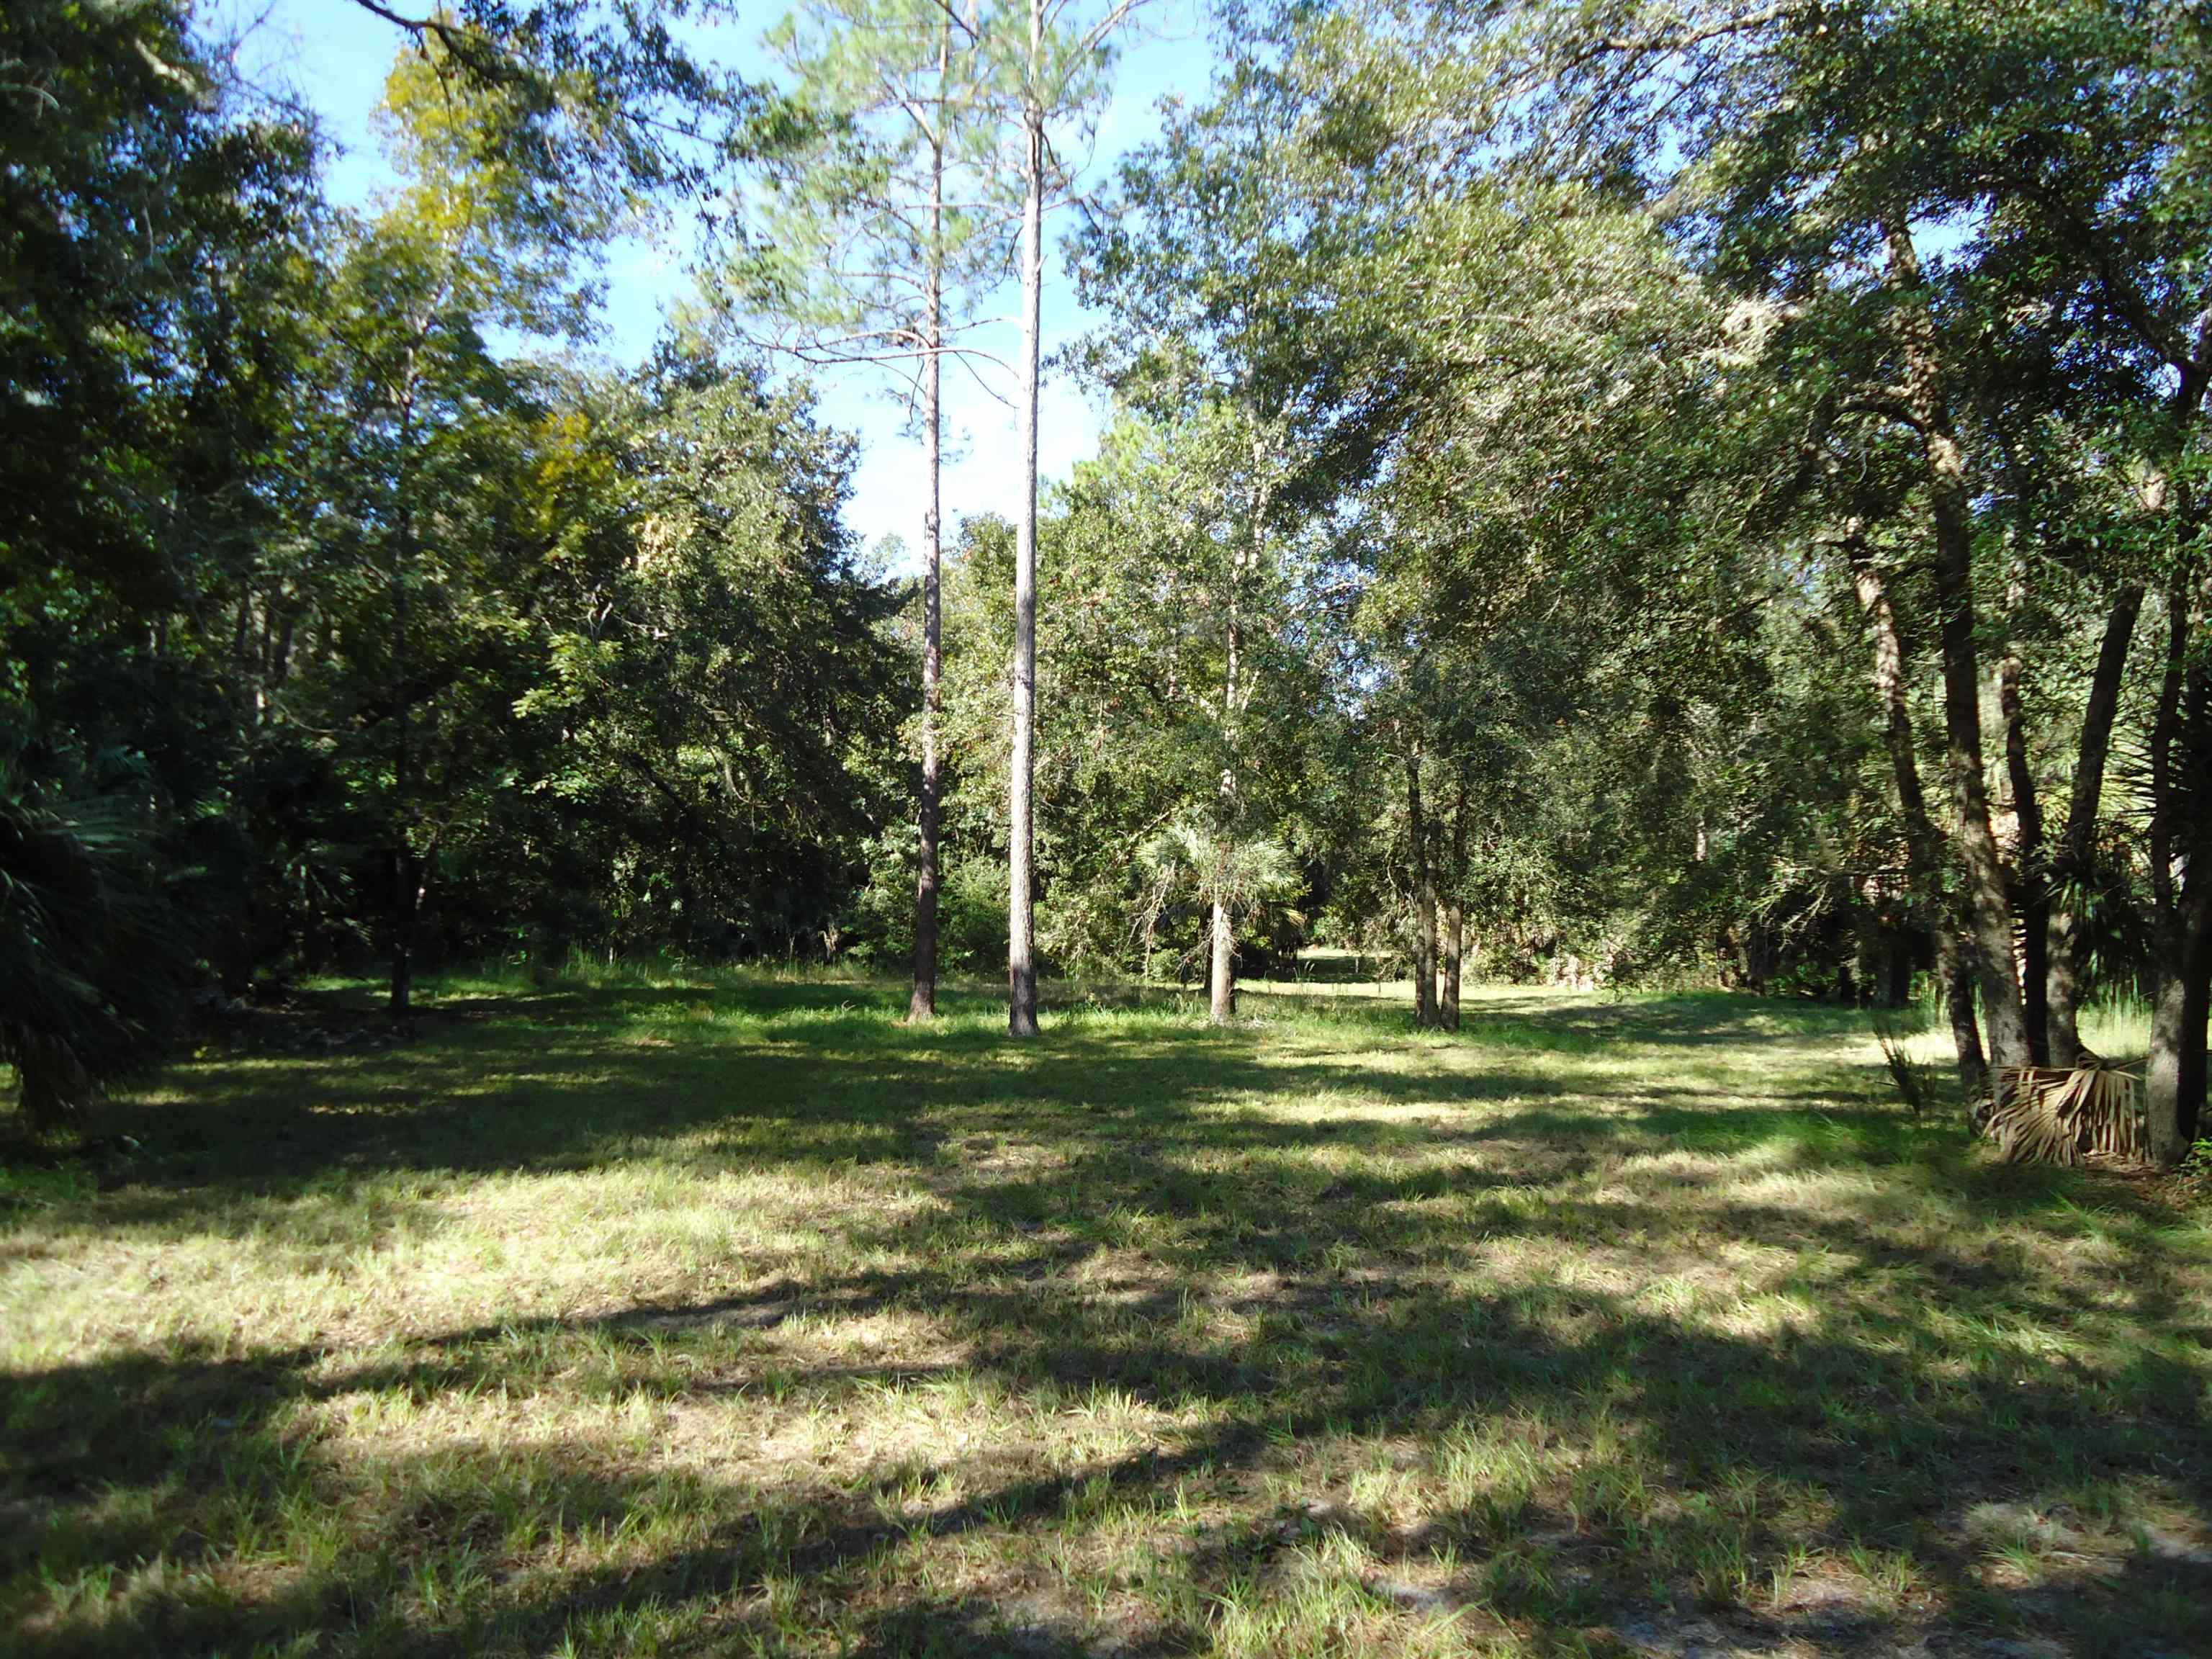 00 Econfina River Rd (CR 14),LAMONT,Florida 32336,Lots and land,Econfina River Rd (CR 14),363868